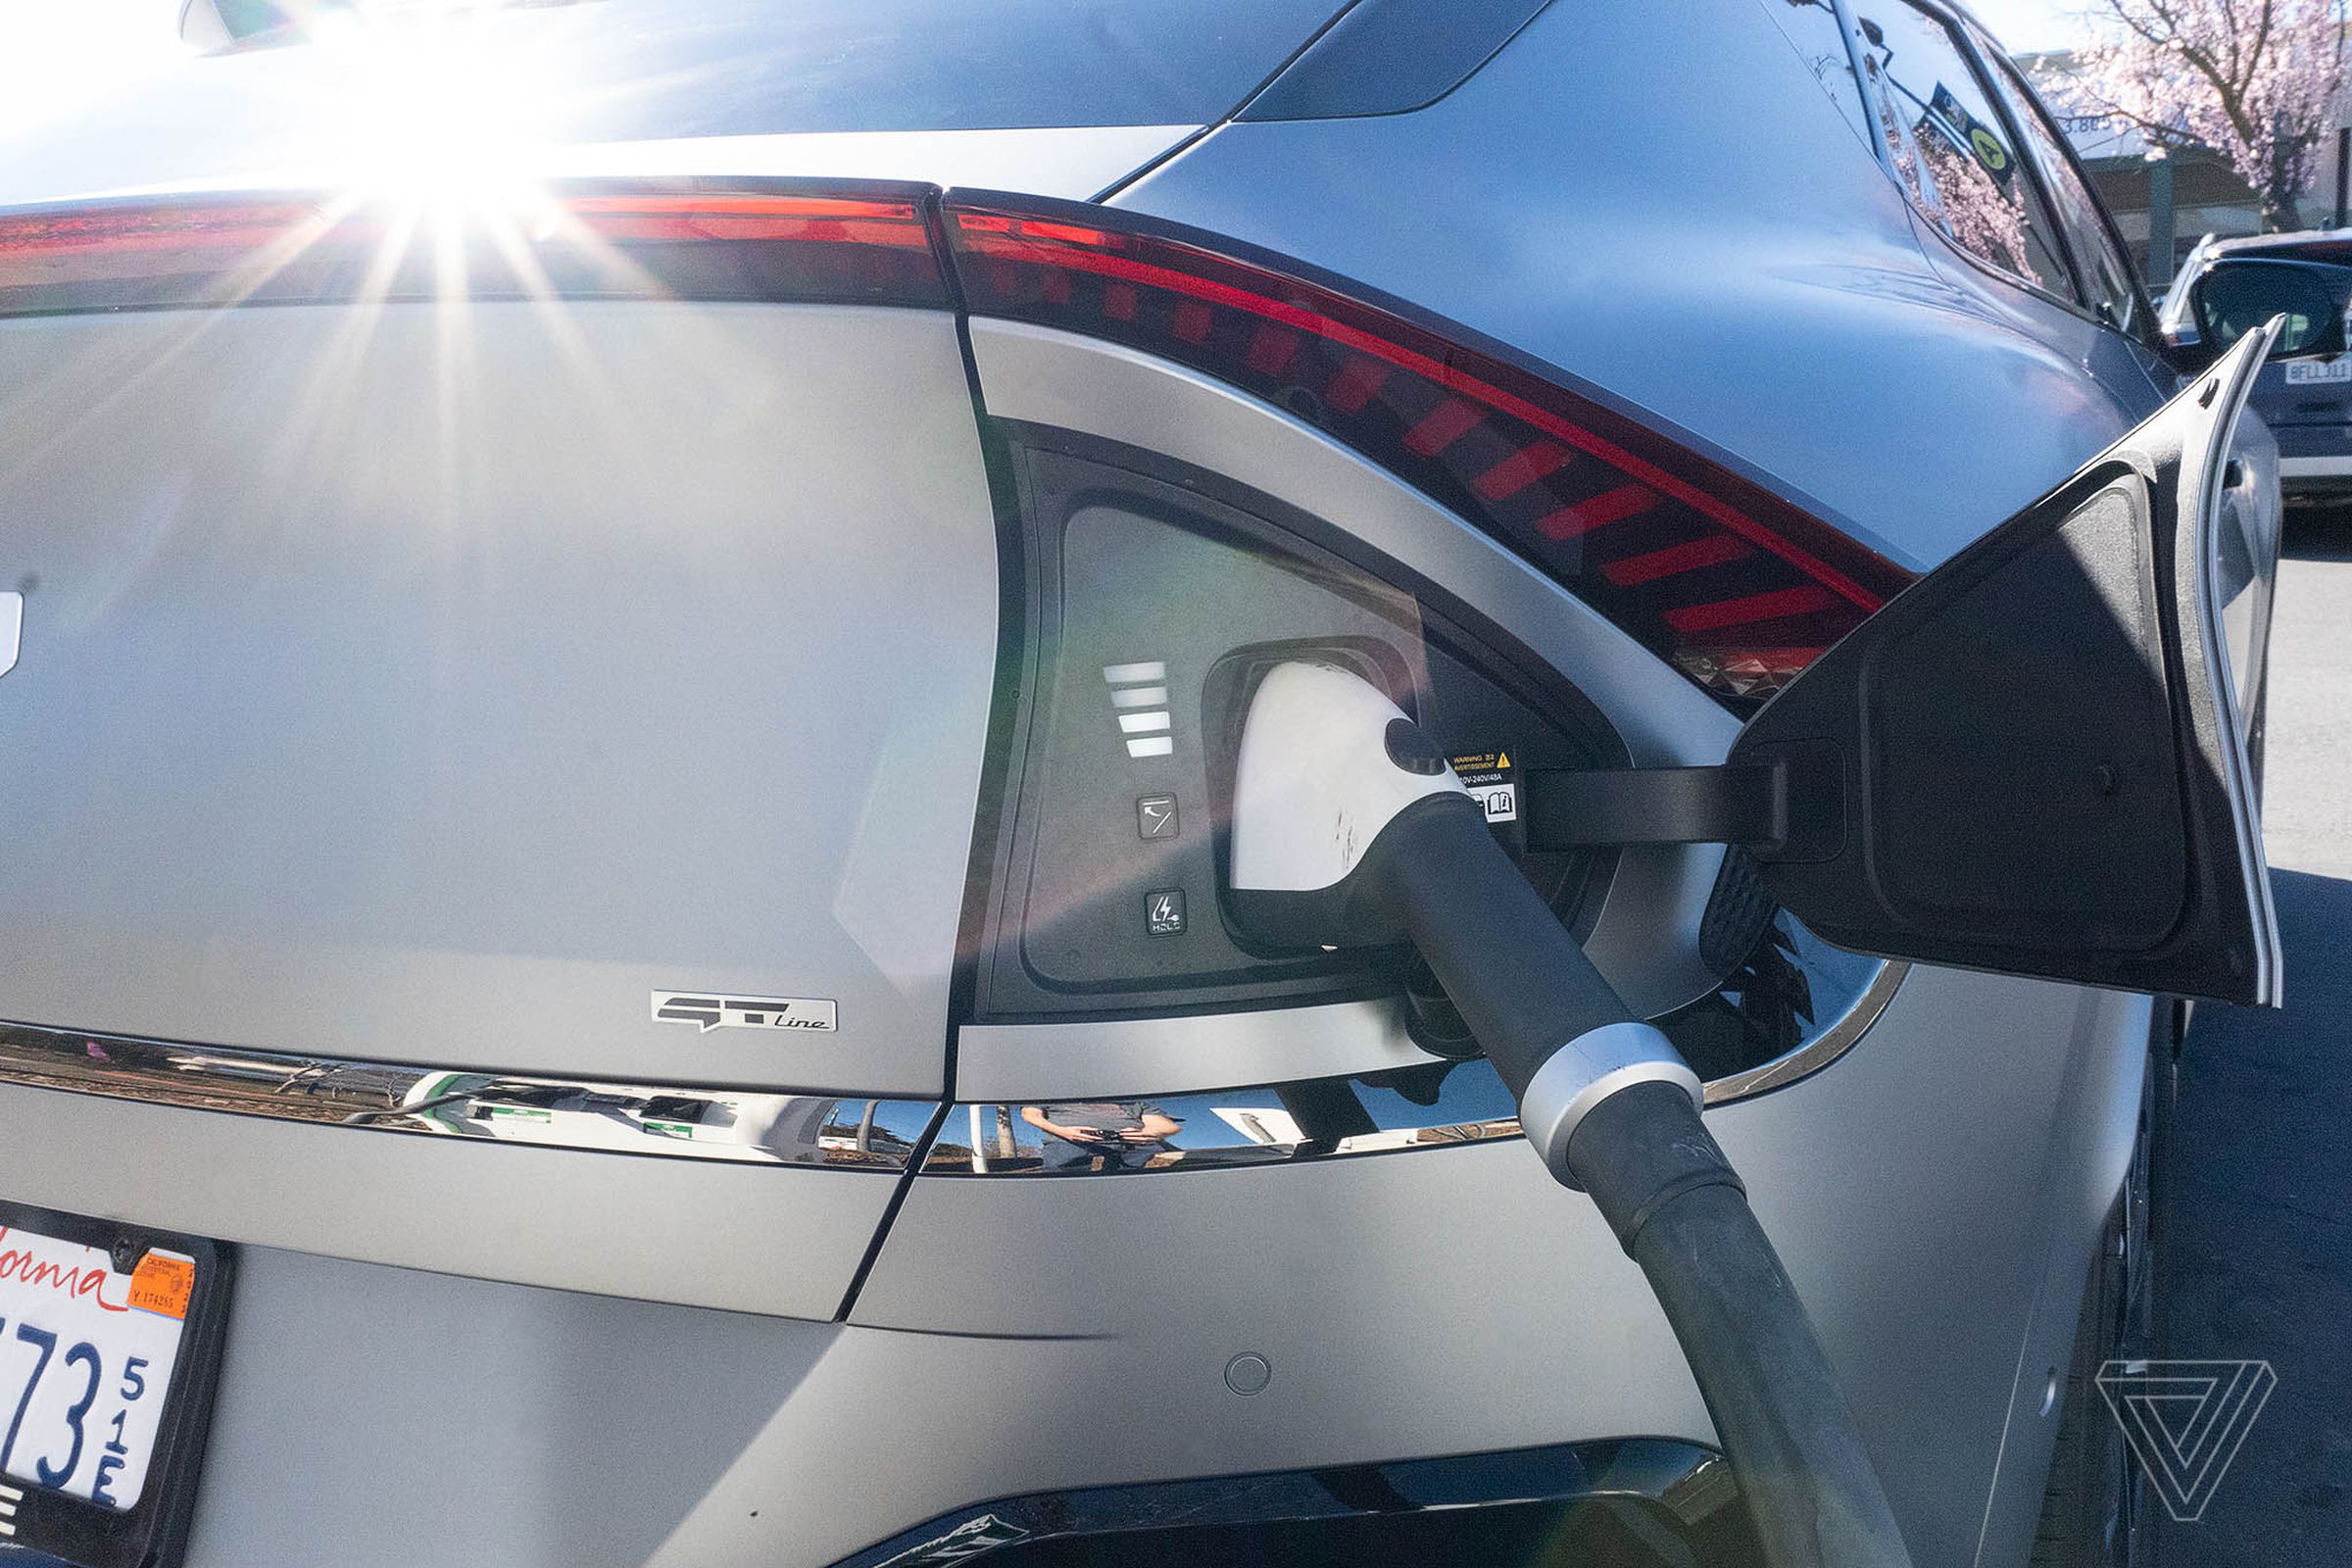 For Kia, the EV6 sets a bar not only for its own future vehicles but for every other automaker.